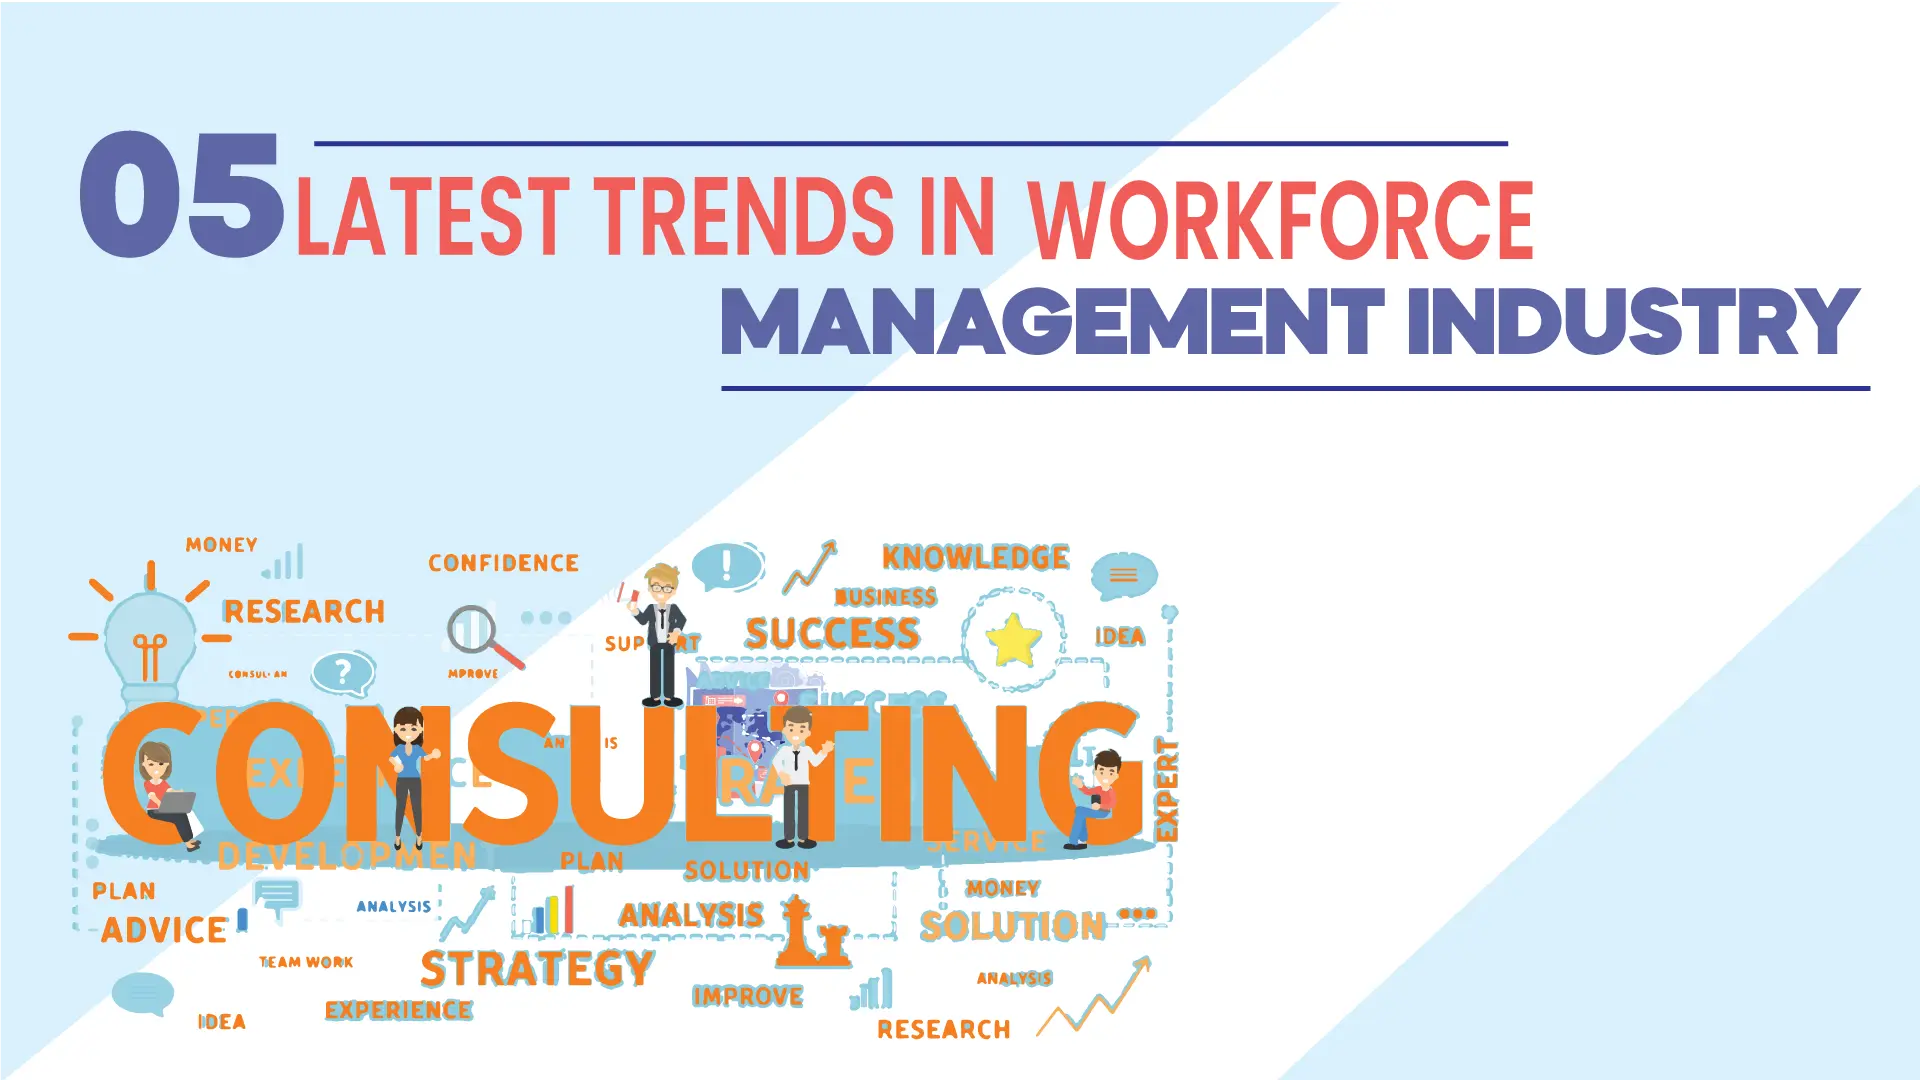 5 Latest Trends in the Workforce Management Industry